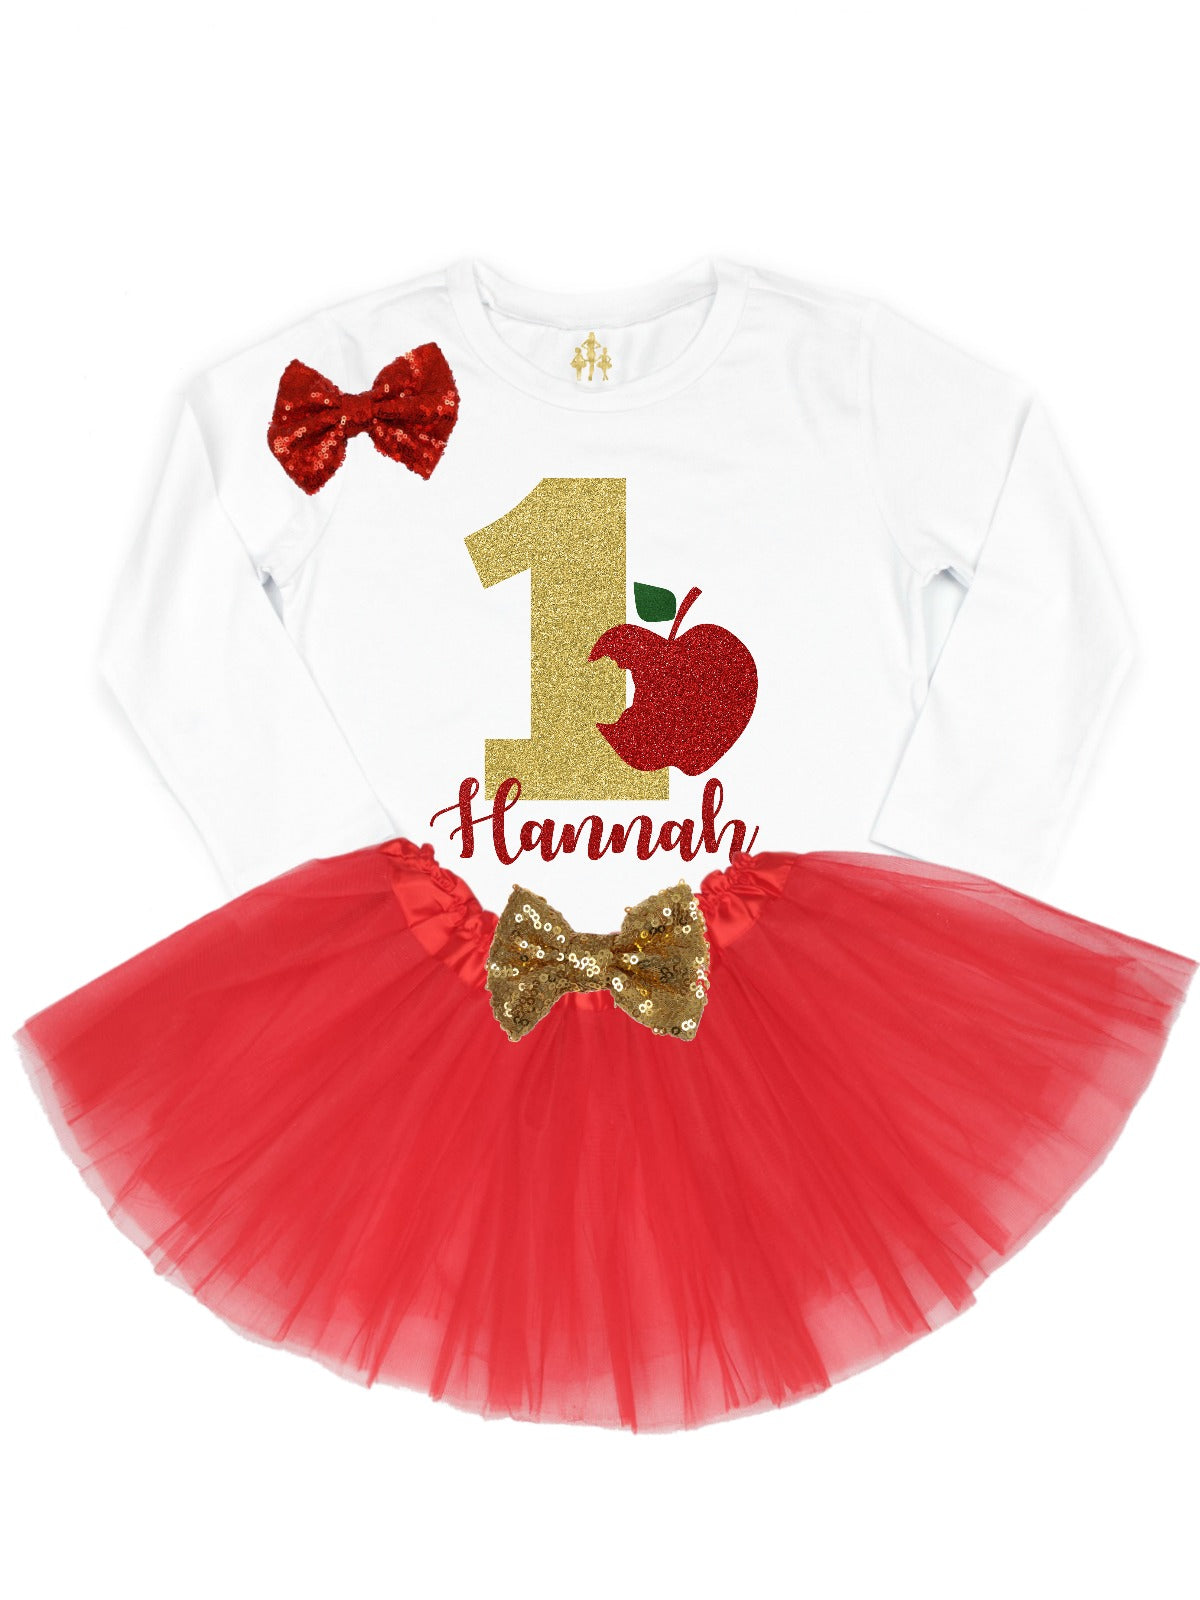 girls bitten apple red and gold birthday tutu outfit